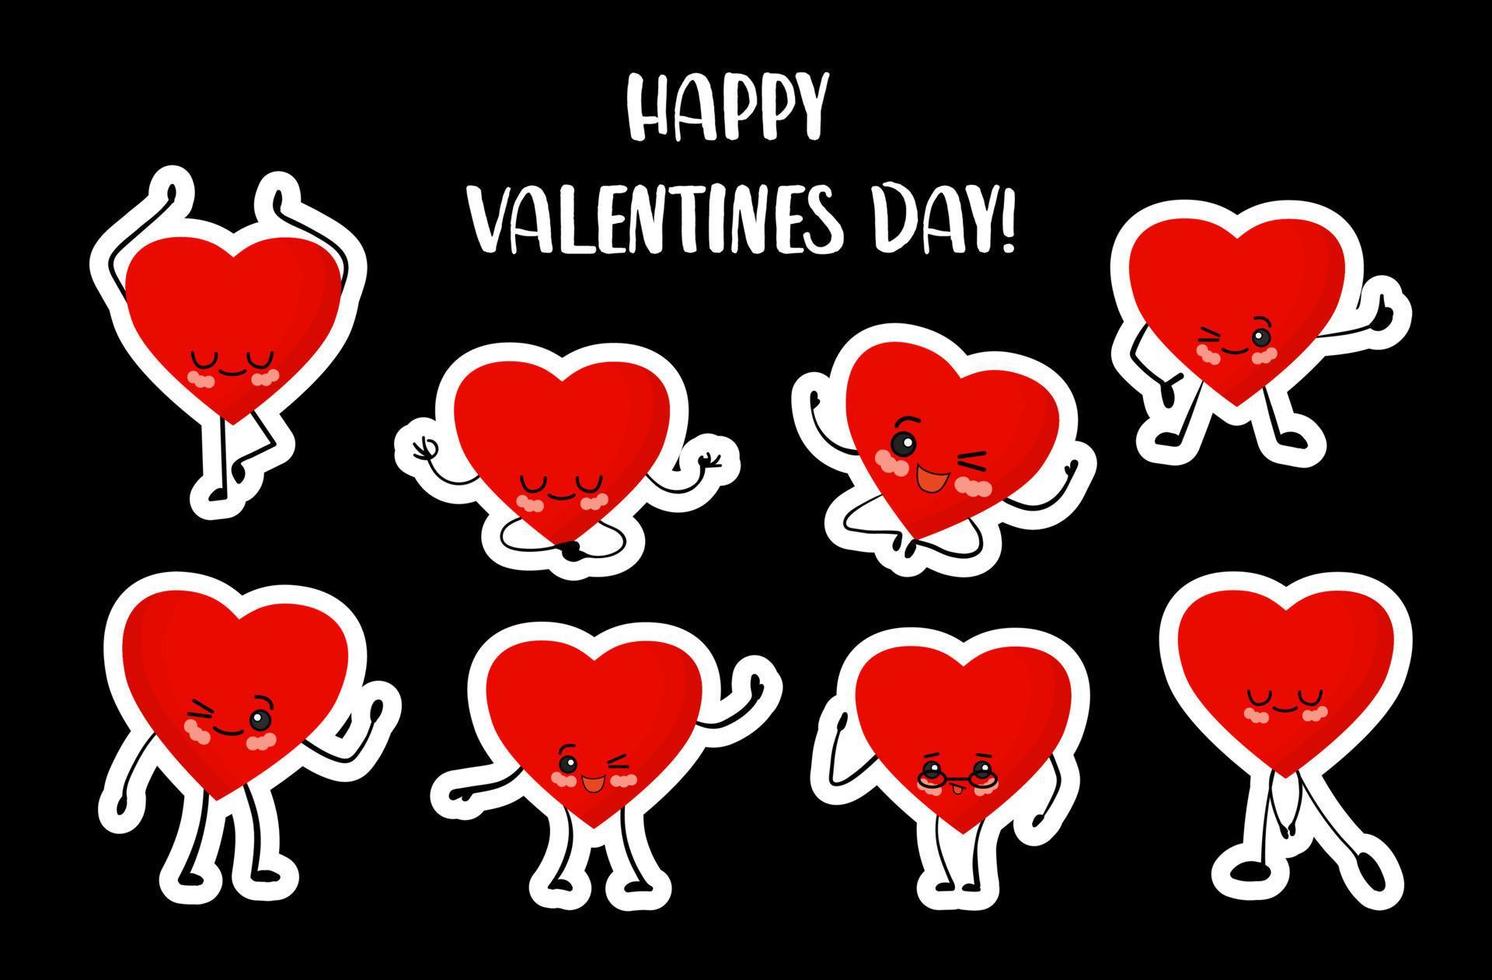 Valentine's Day. Set of stickers on a white background. Cute kawaii cartoon hearts with eyes and arms and legs. Cheerful heart character red.. vector